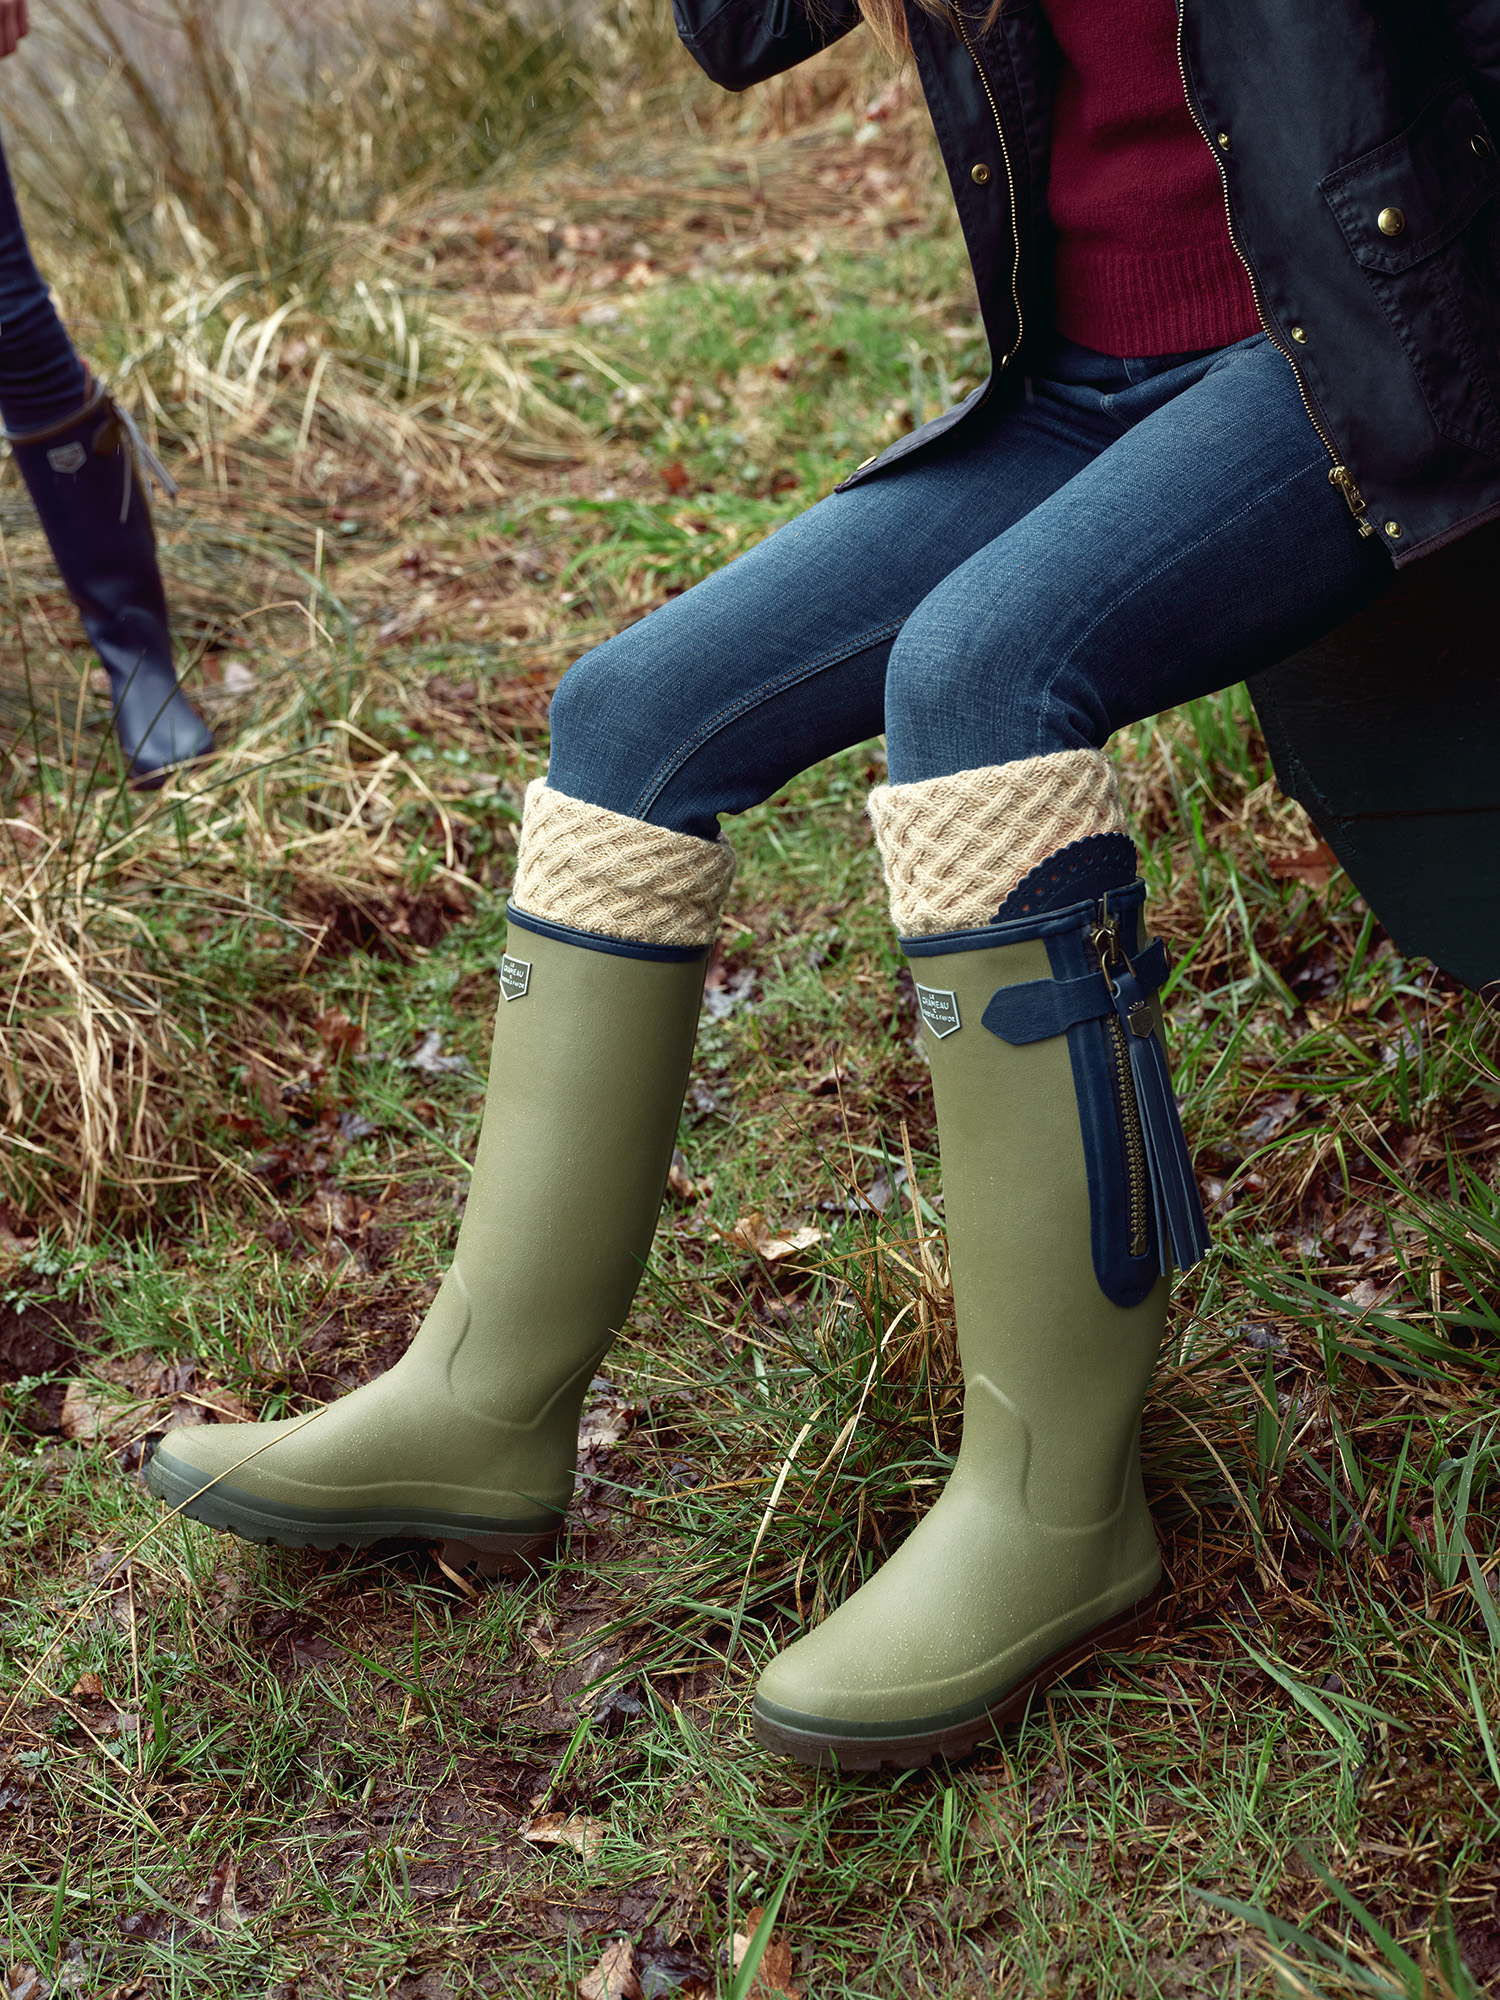 A Buyer’s Guide to Premium Wellies - Philip Morris & Son